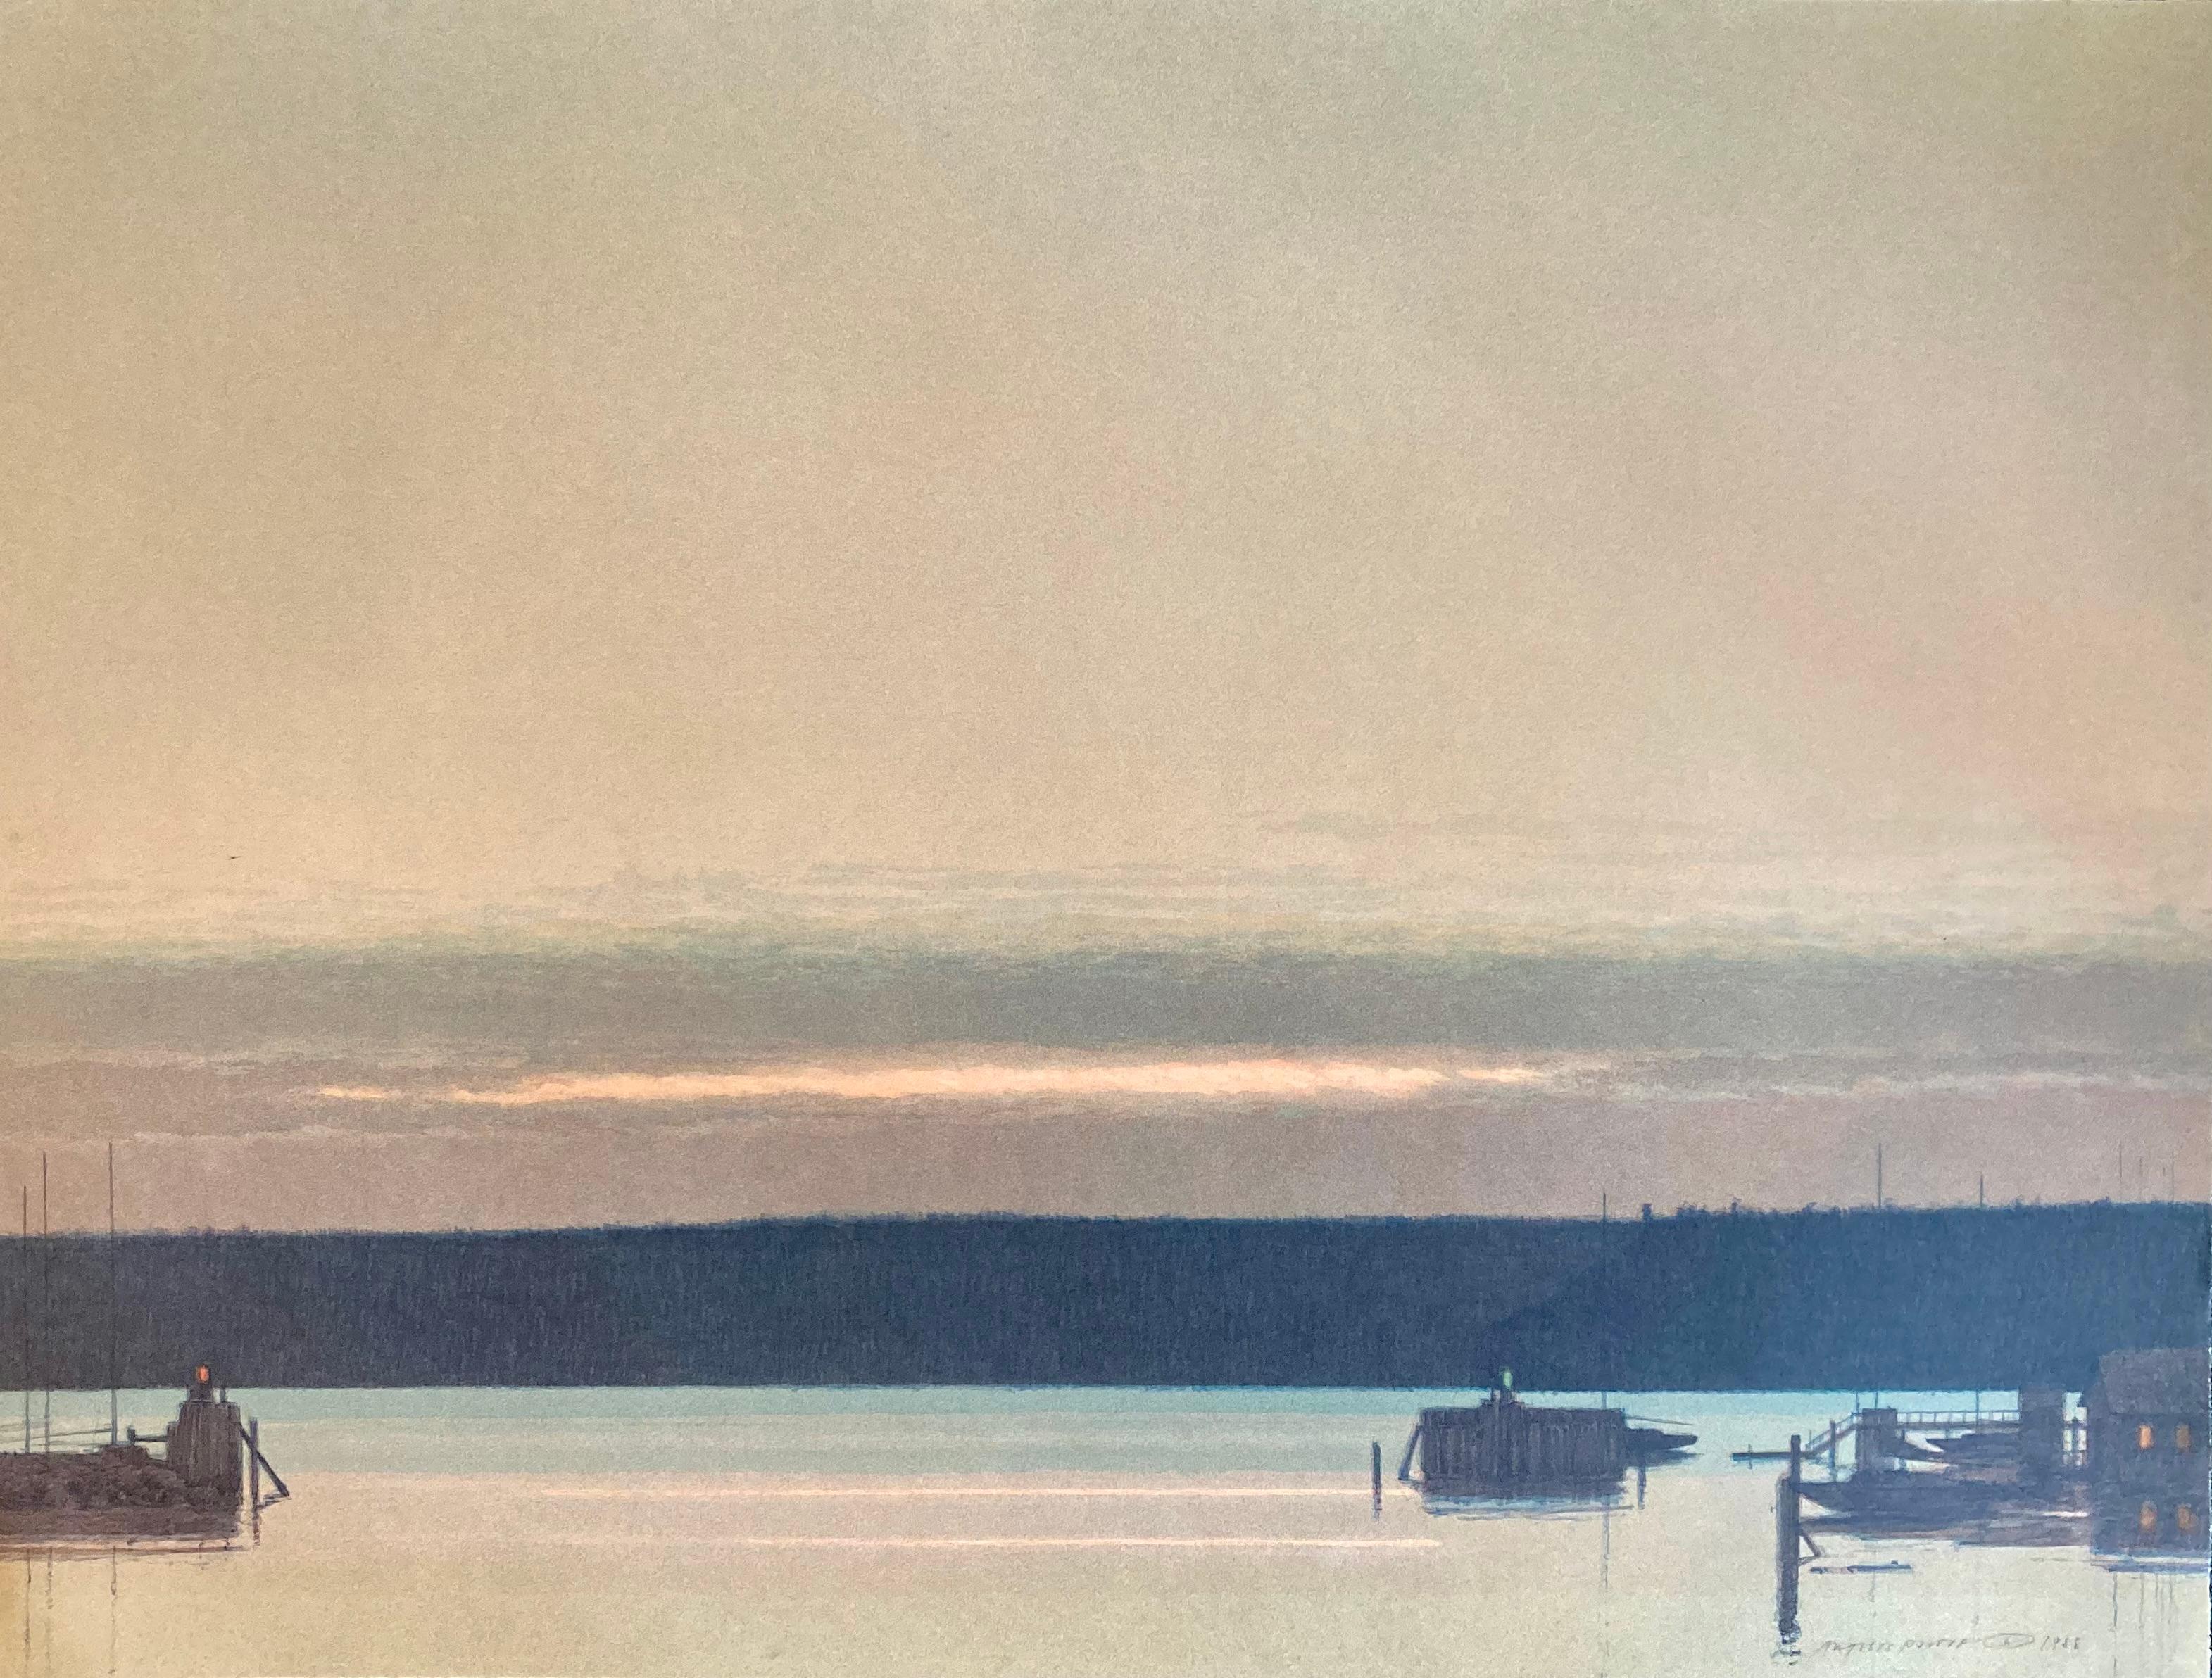 “1988 harbor at evening” - Print by Russell Chatham